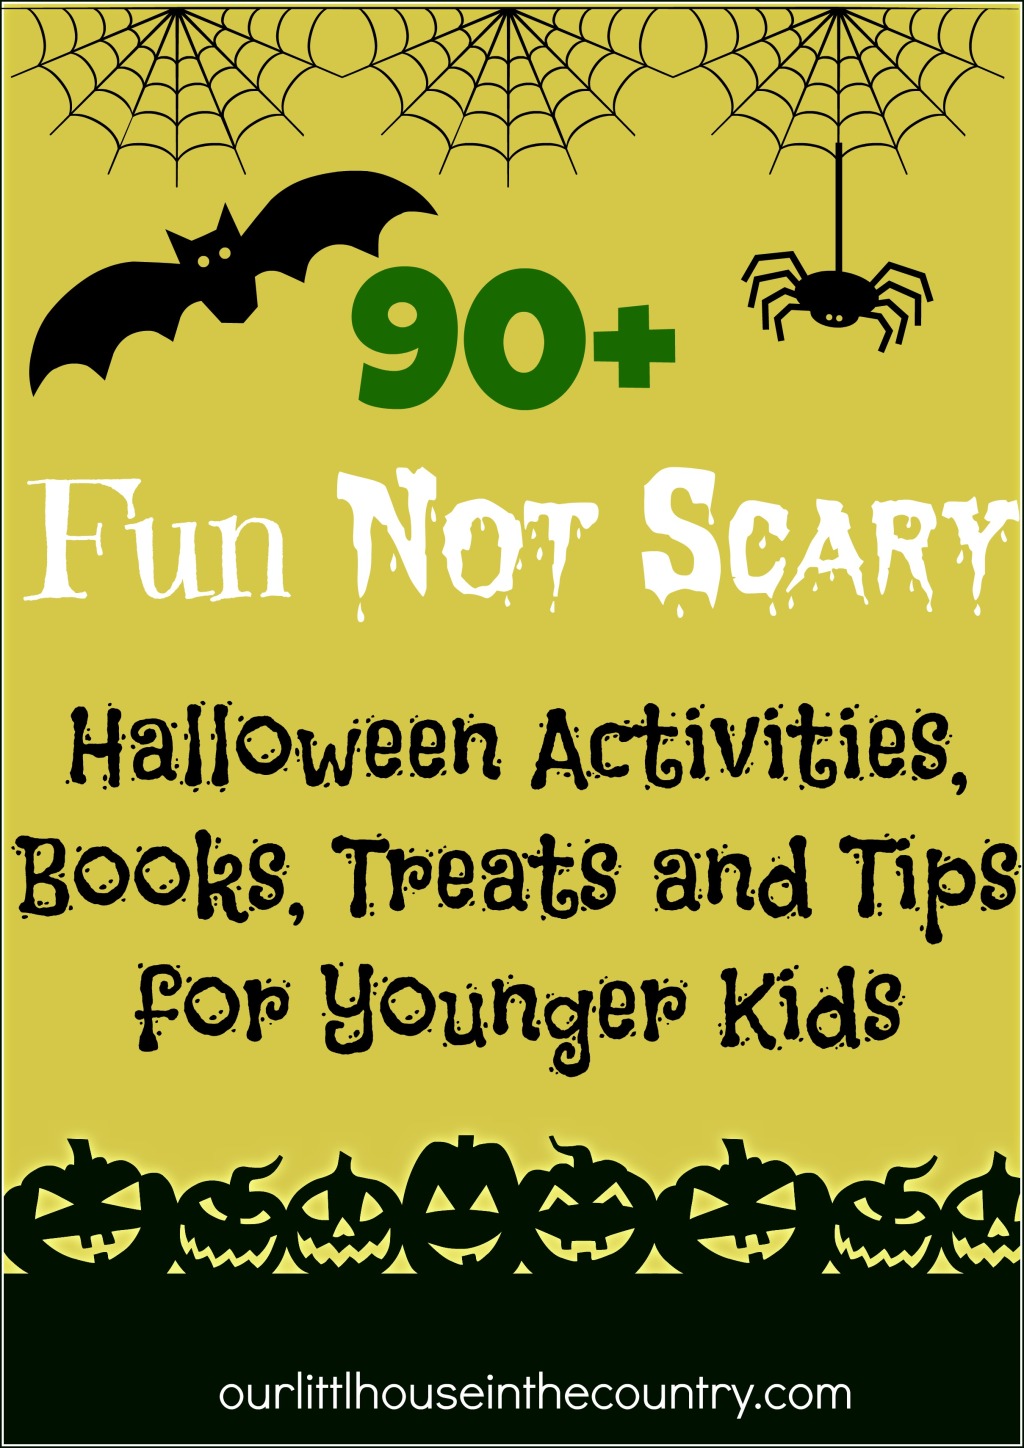 90+ Halloween Activities, Crafts, Books,  Tips, Tricks and Treats for Younger Children